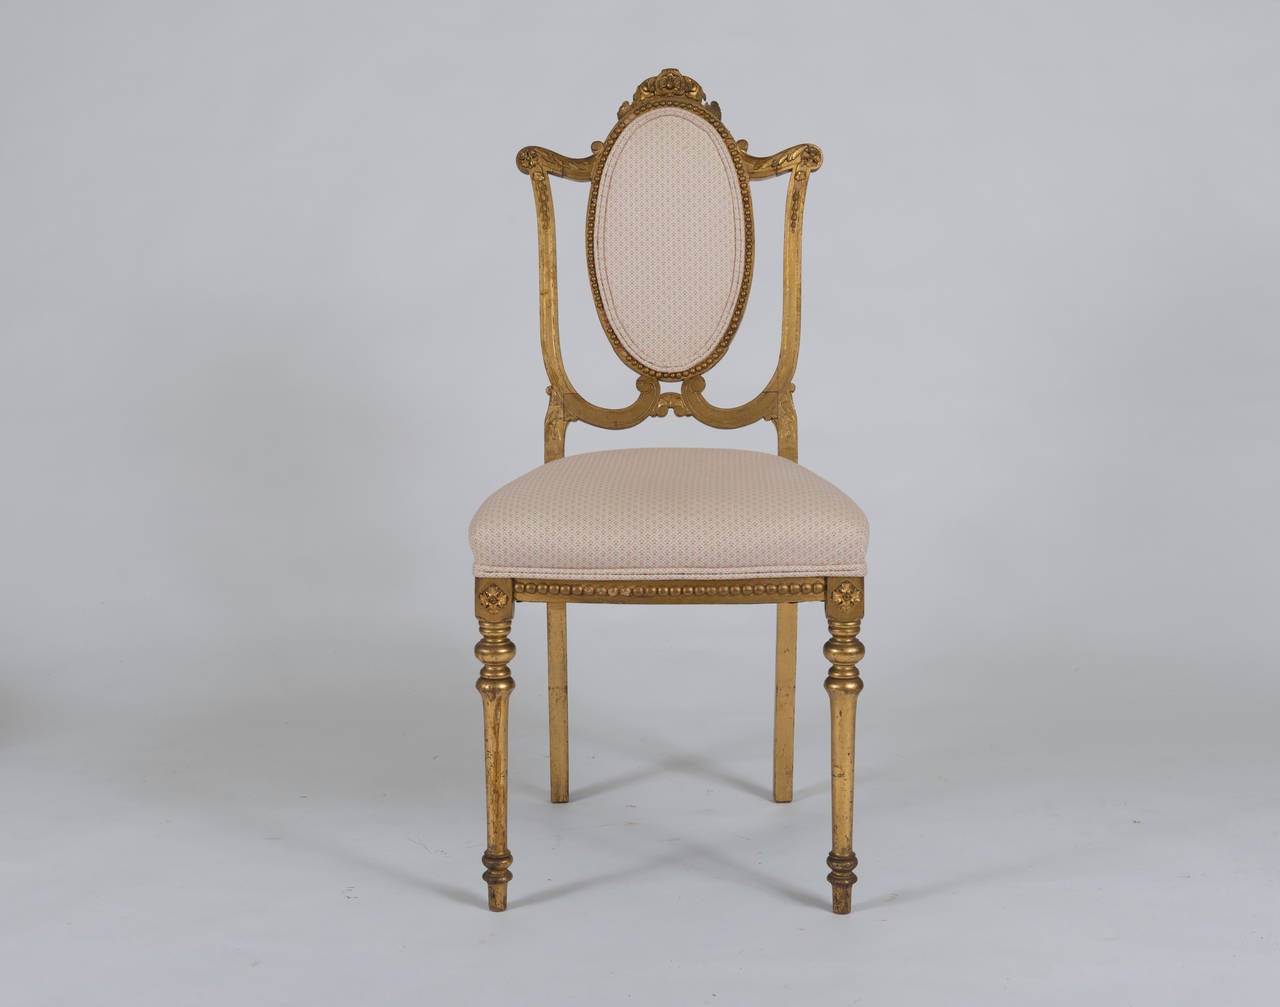 With oval upholstered back and seat; the giltwood frame with floral and foliate carved decoration.